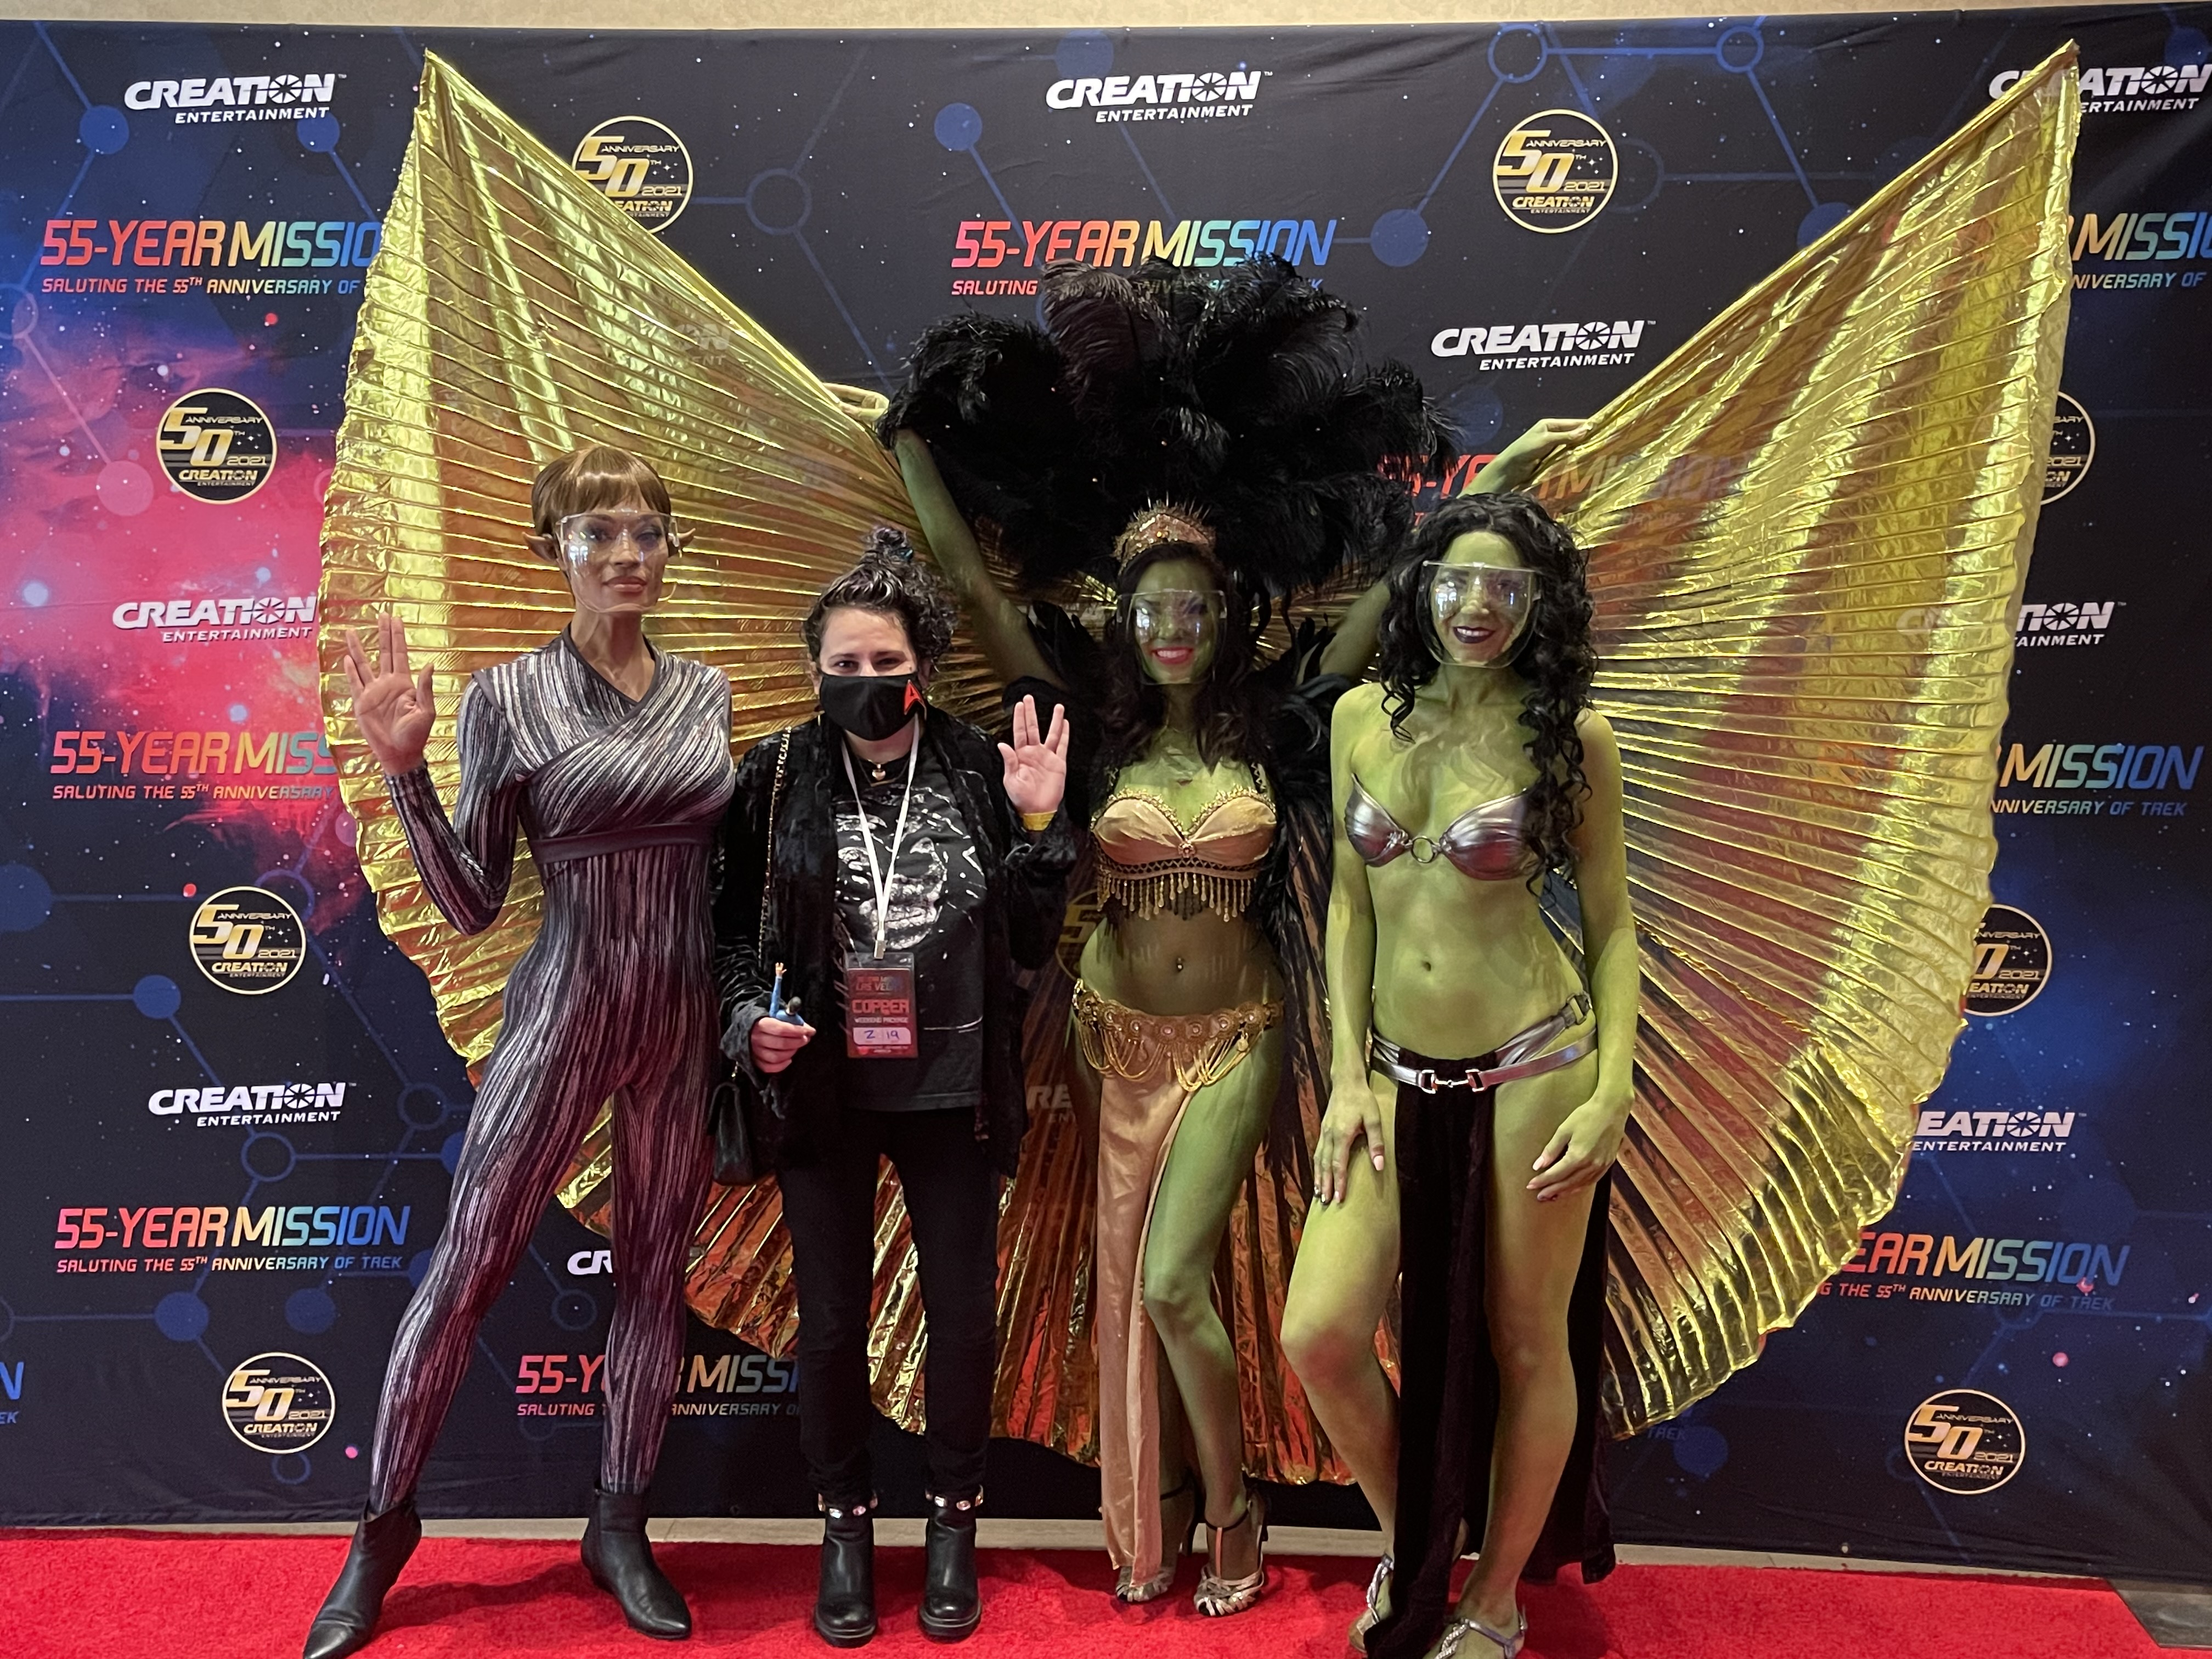 Cosplayers at Creation Entertainment's Trek Convention